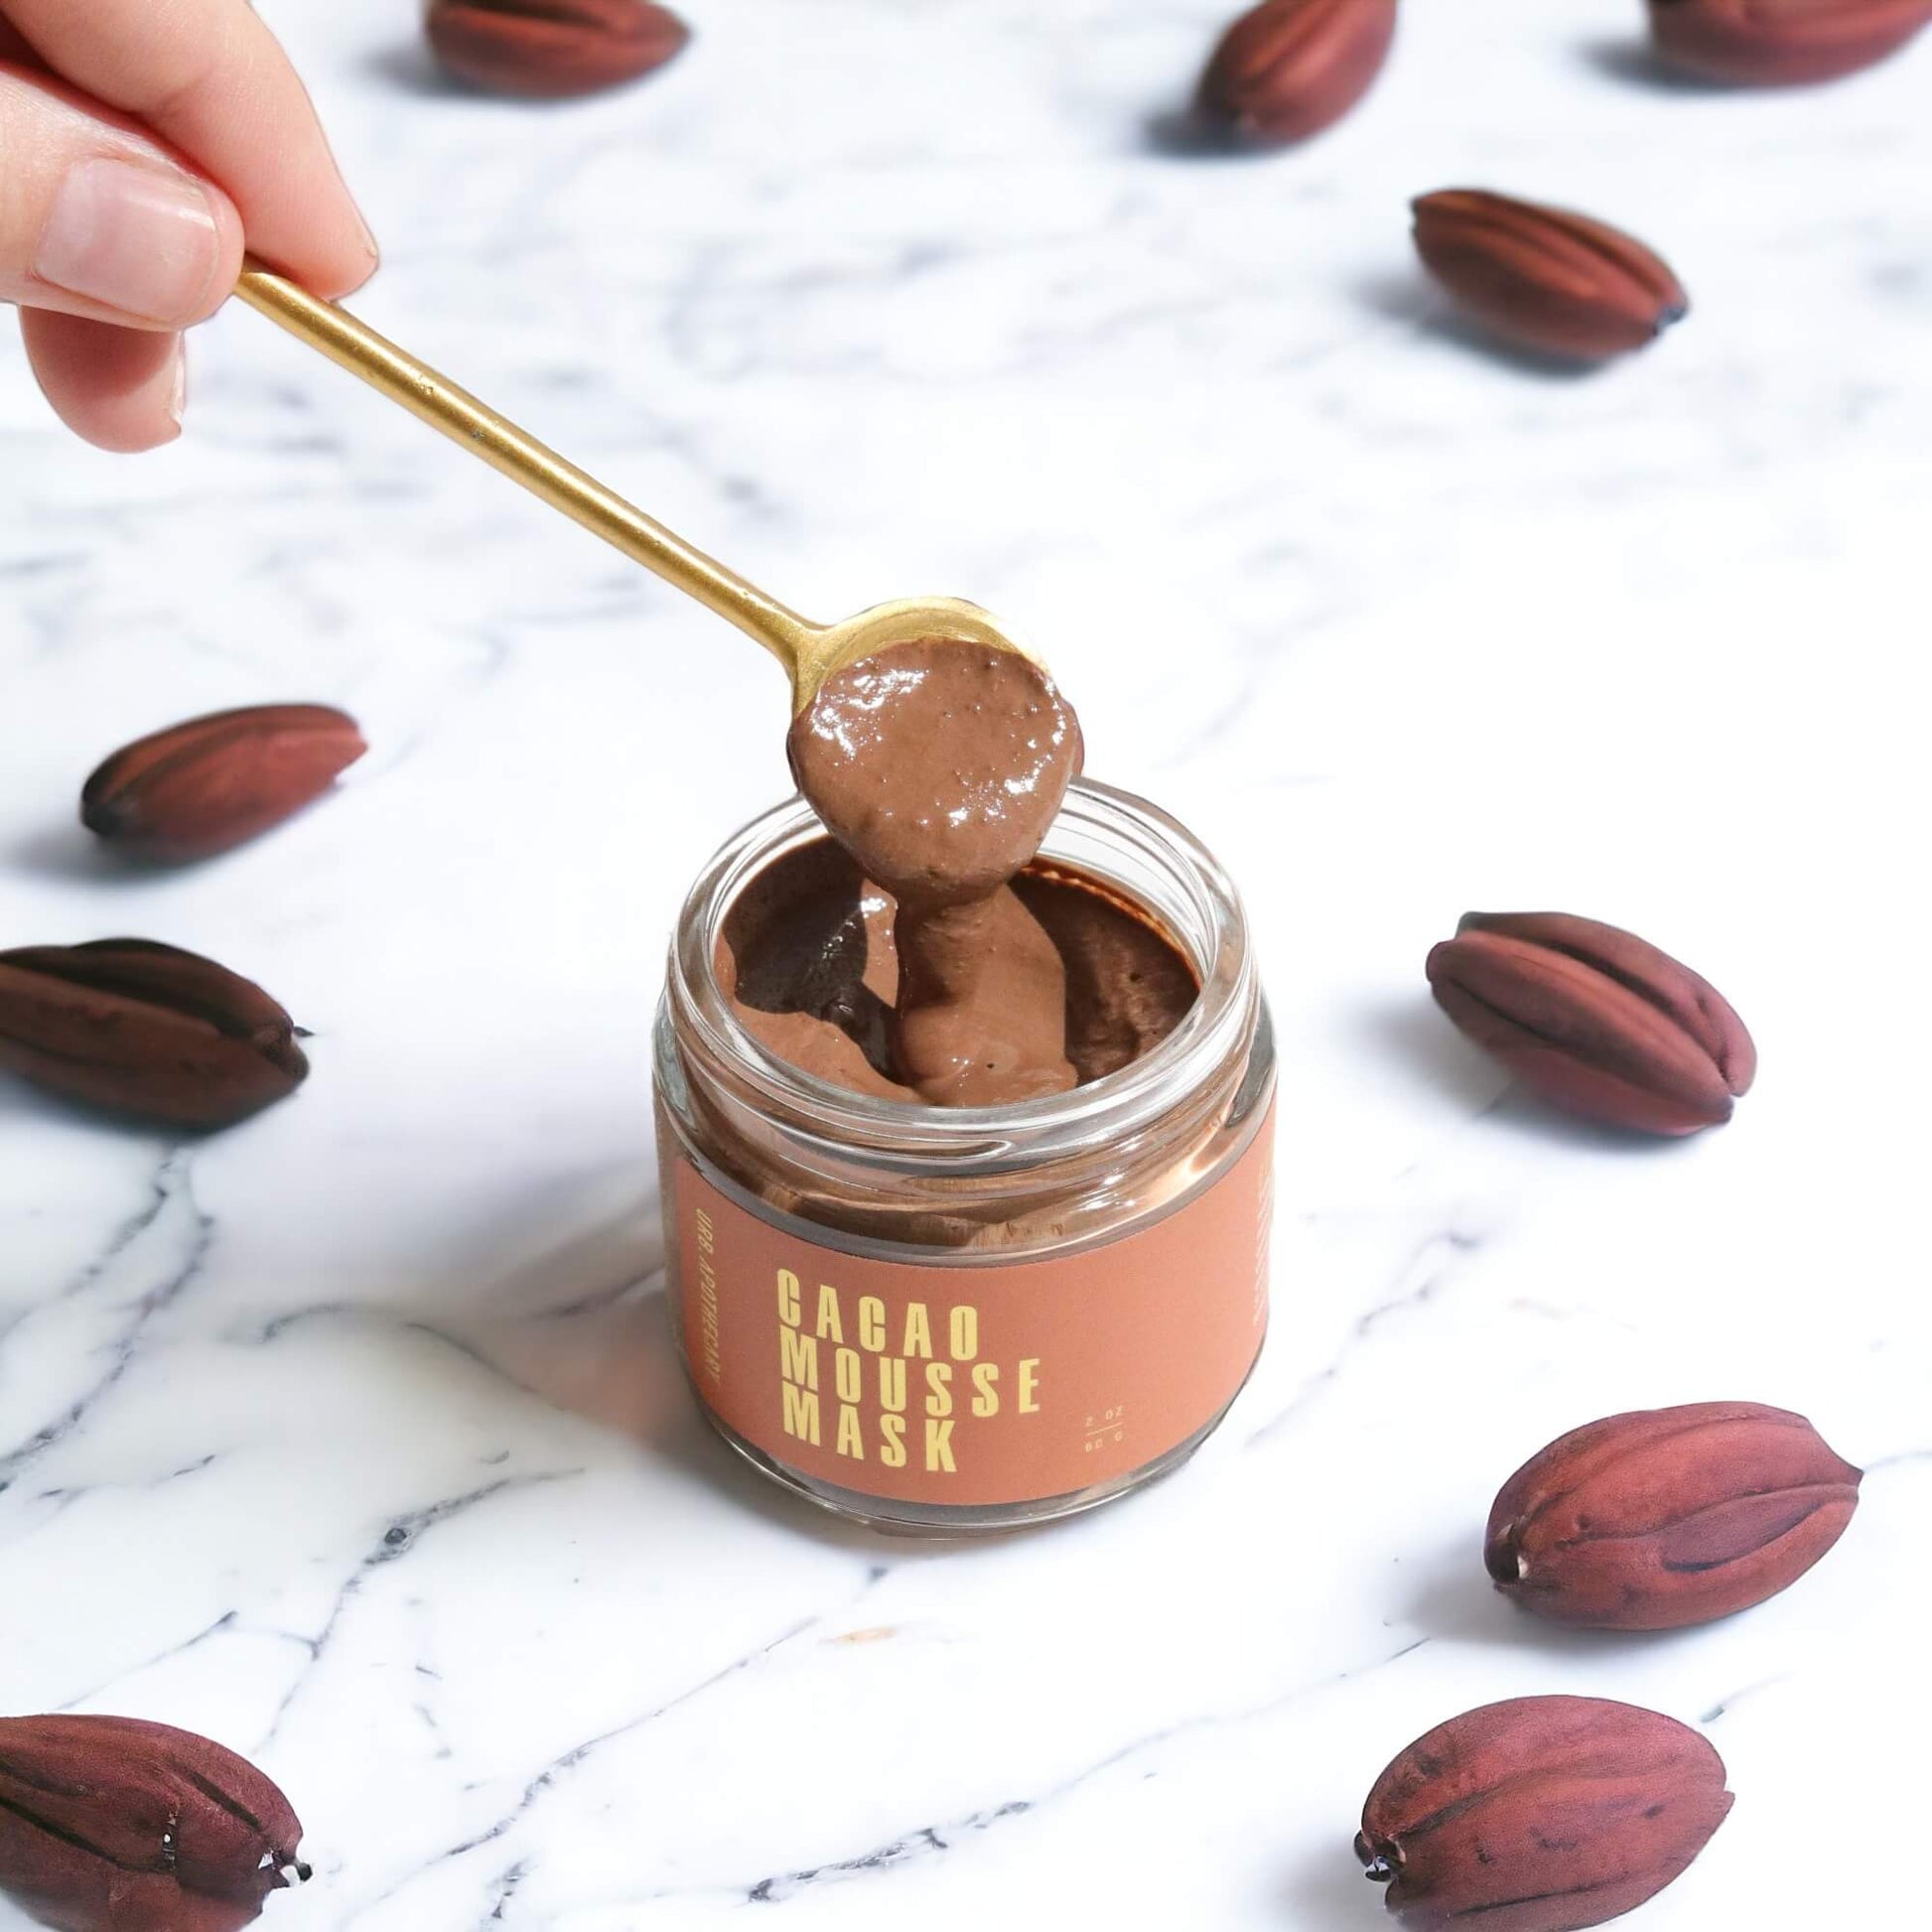 An open jar of the Cacao Mousse Mask with a gold spoon and cacao beans sprinkled on a granite counter